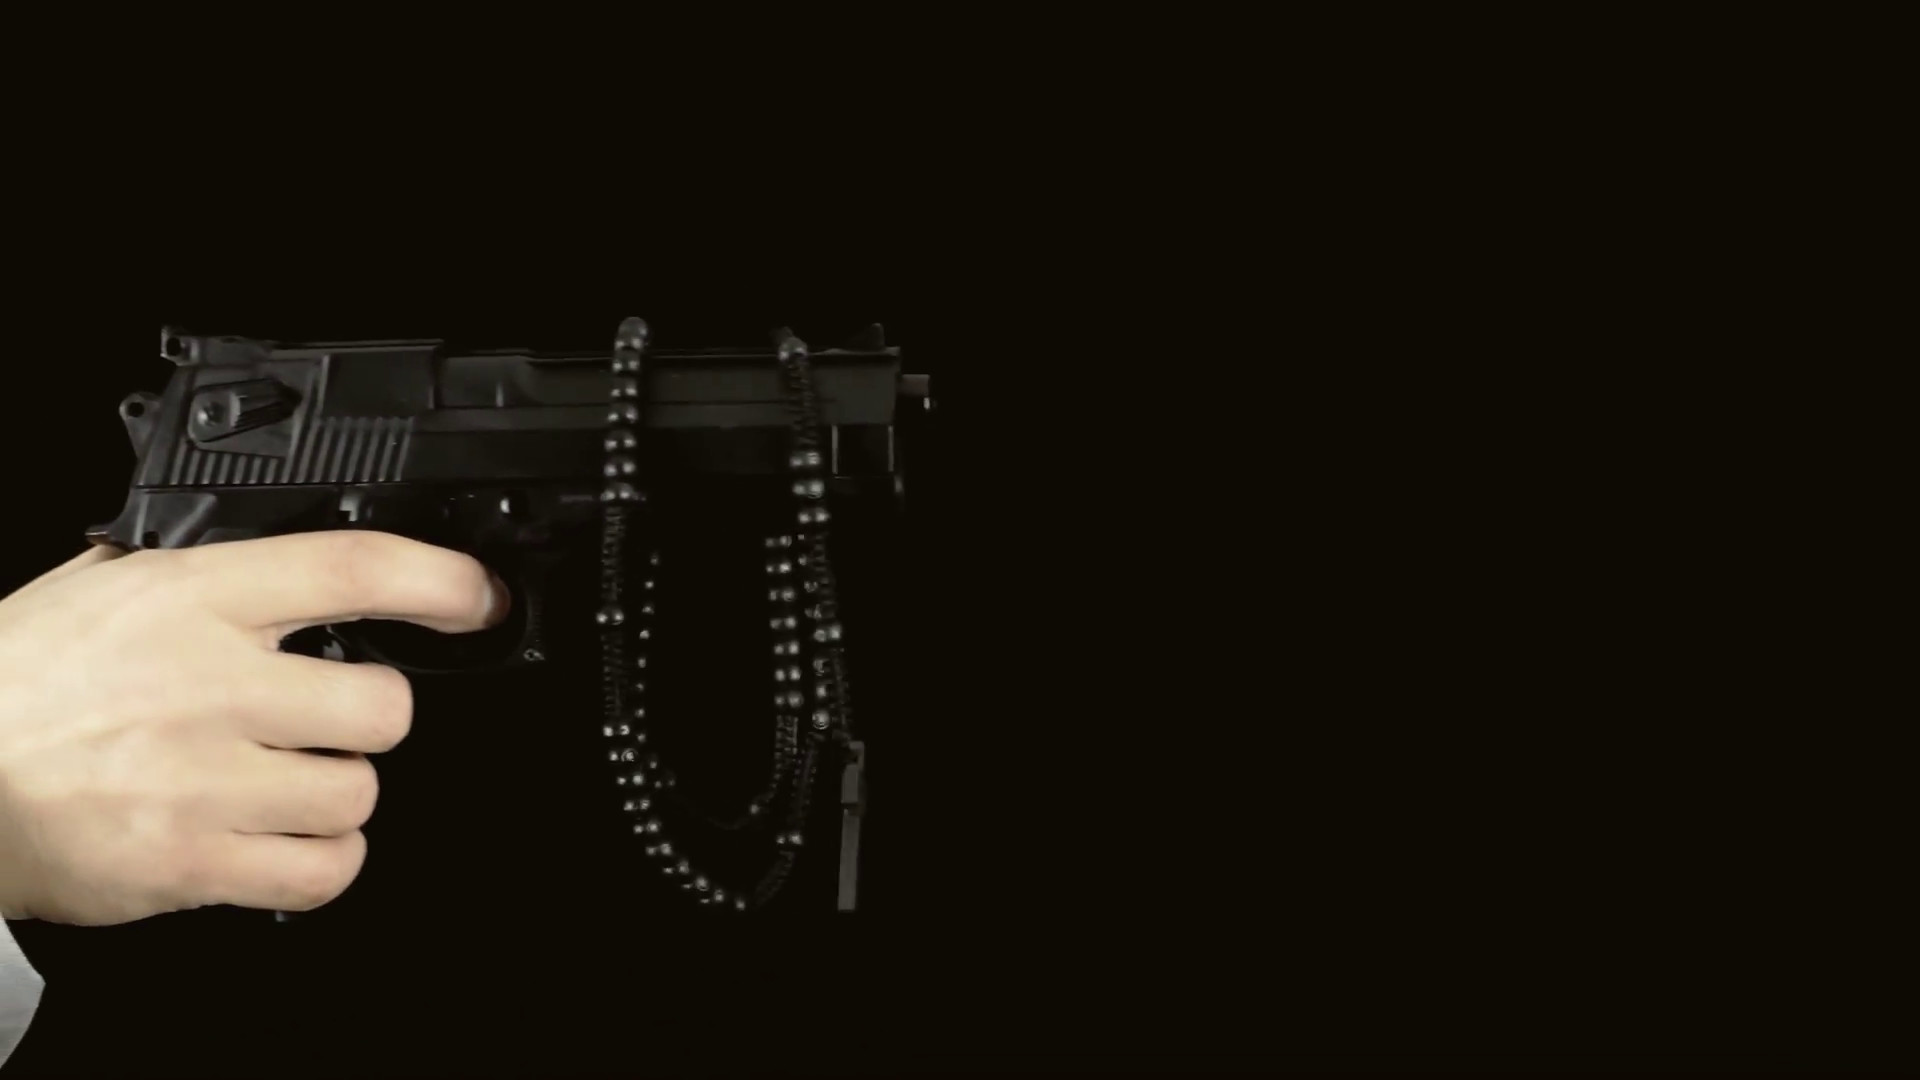 1920x1080 Gun rosary hand black background. A hand holding a gun appearing on a black  background